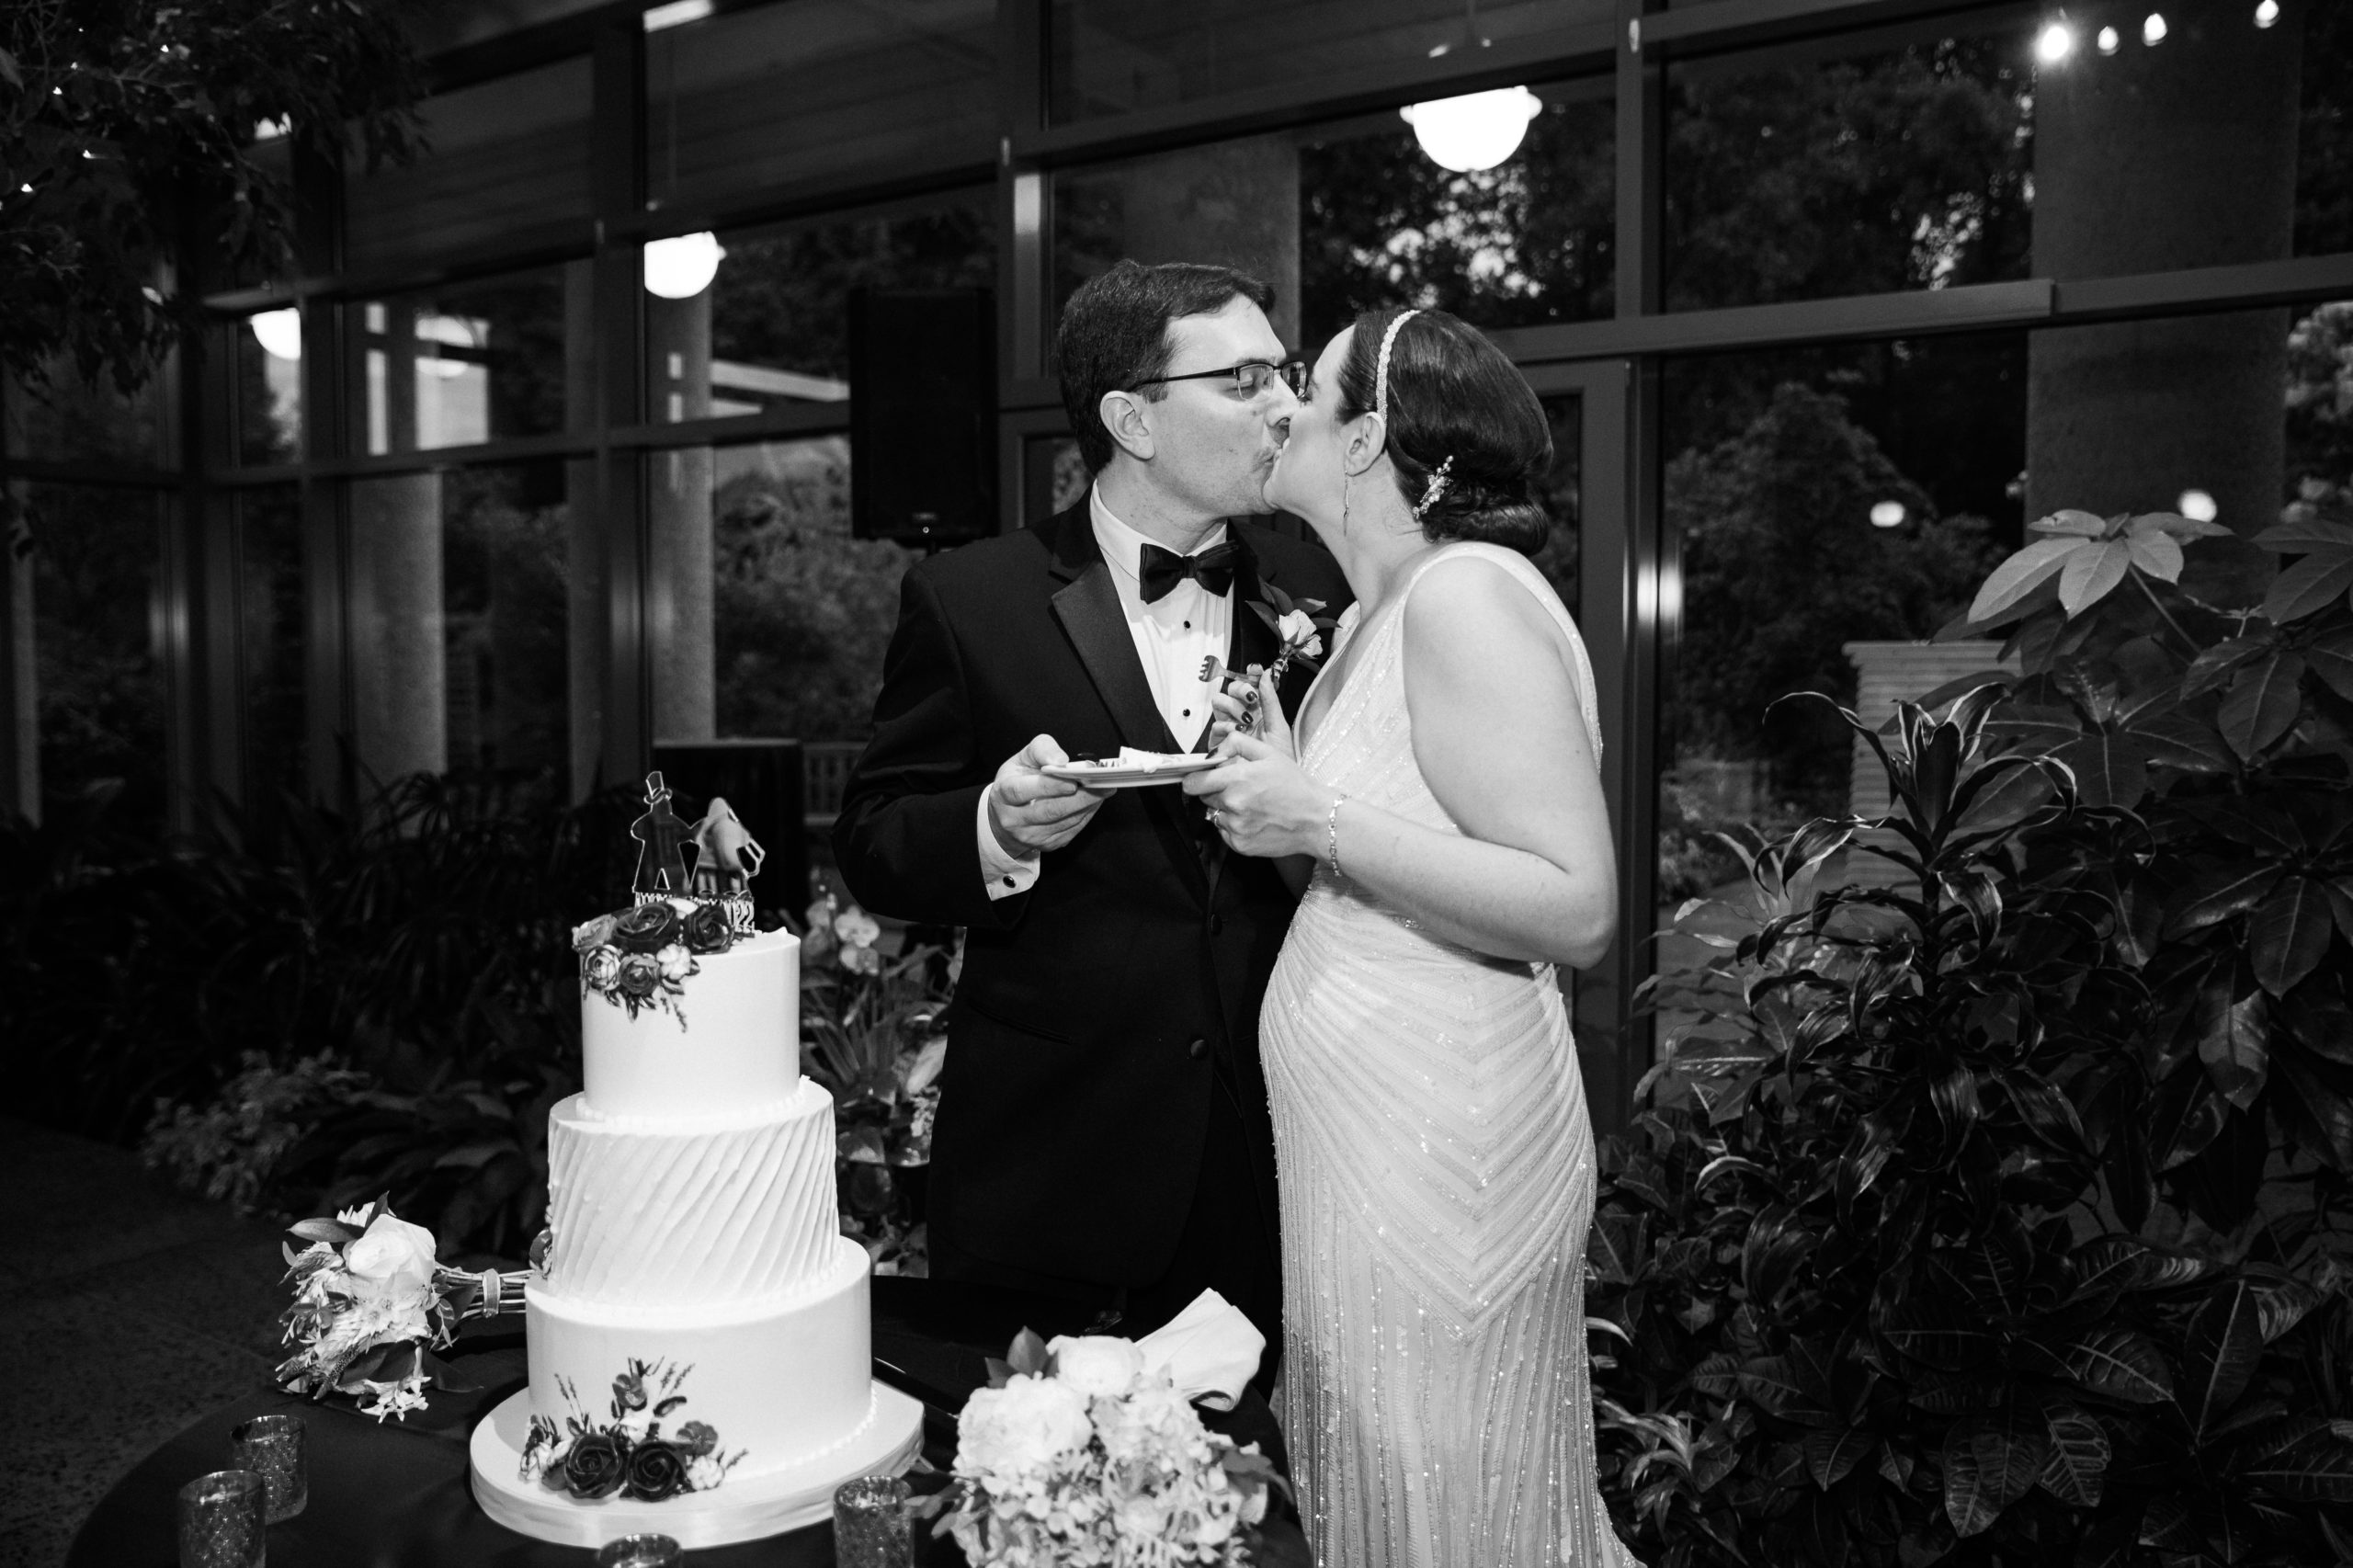 Bride and groom kissing after cutting the wedding cake at the Atrium at Meadowlark Botanical Gardens